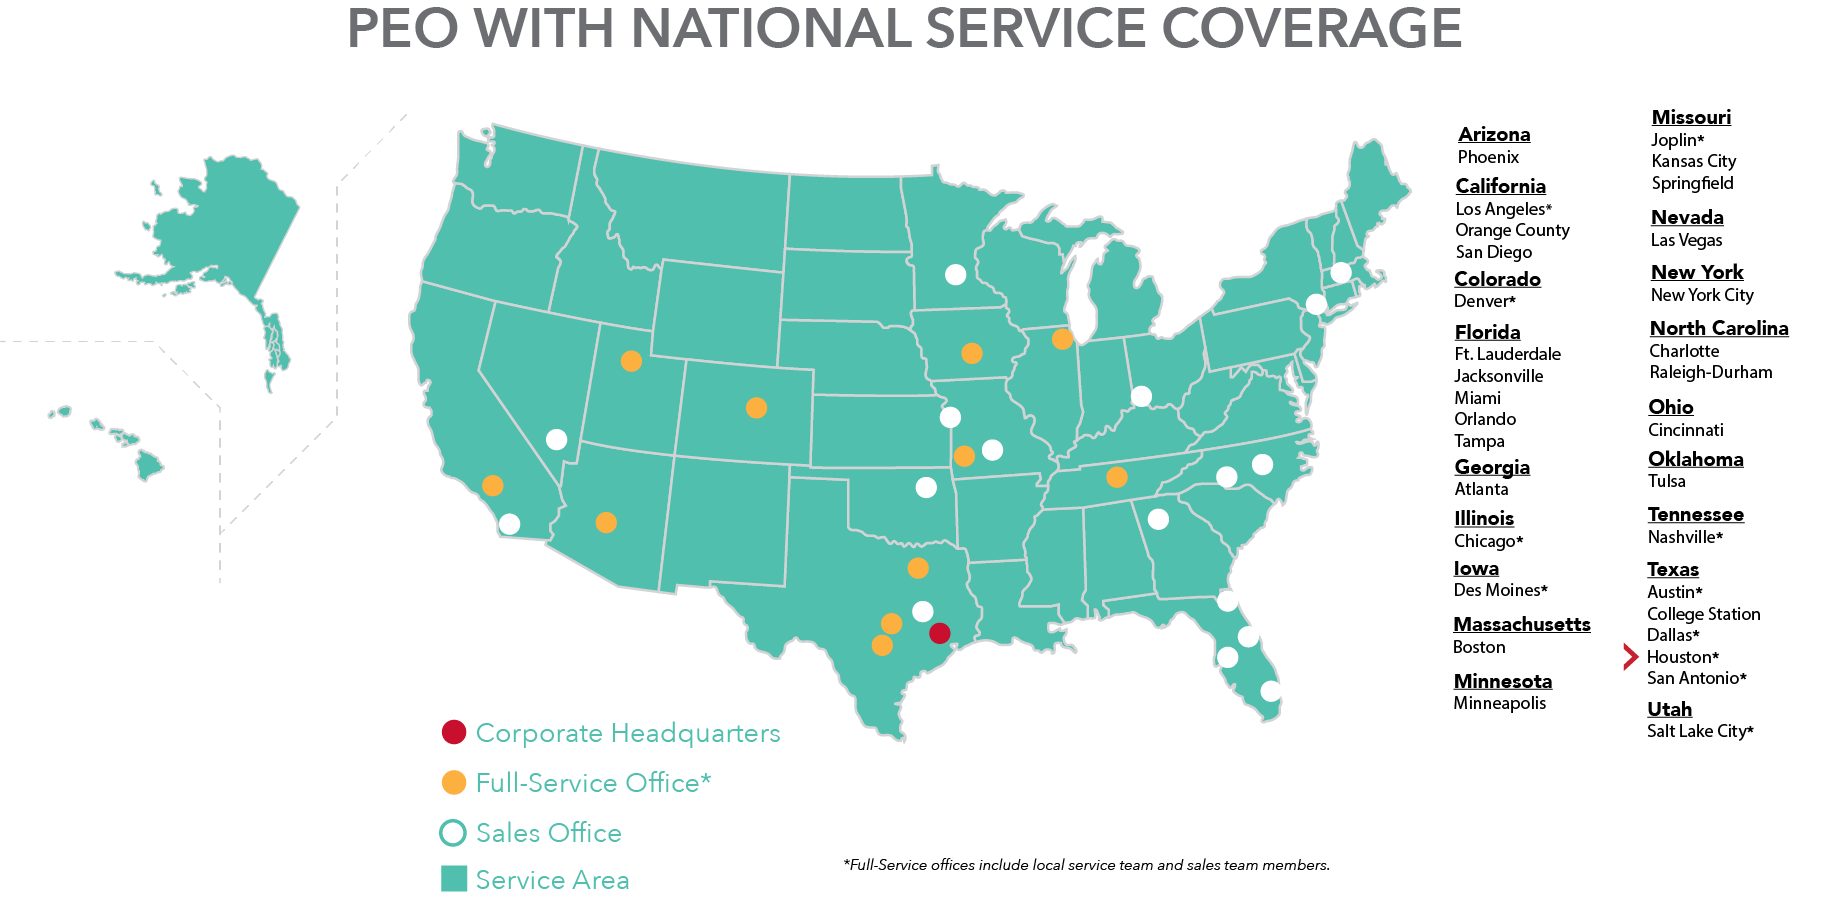 G&A Partners PEO coverage map of the United States